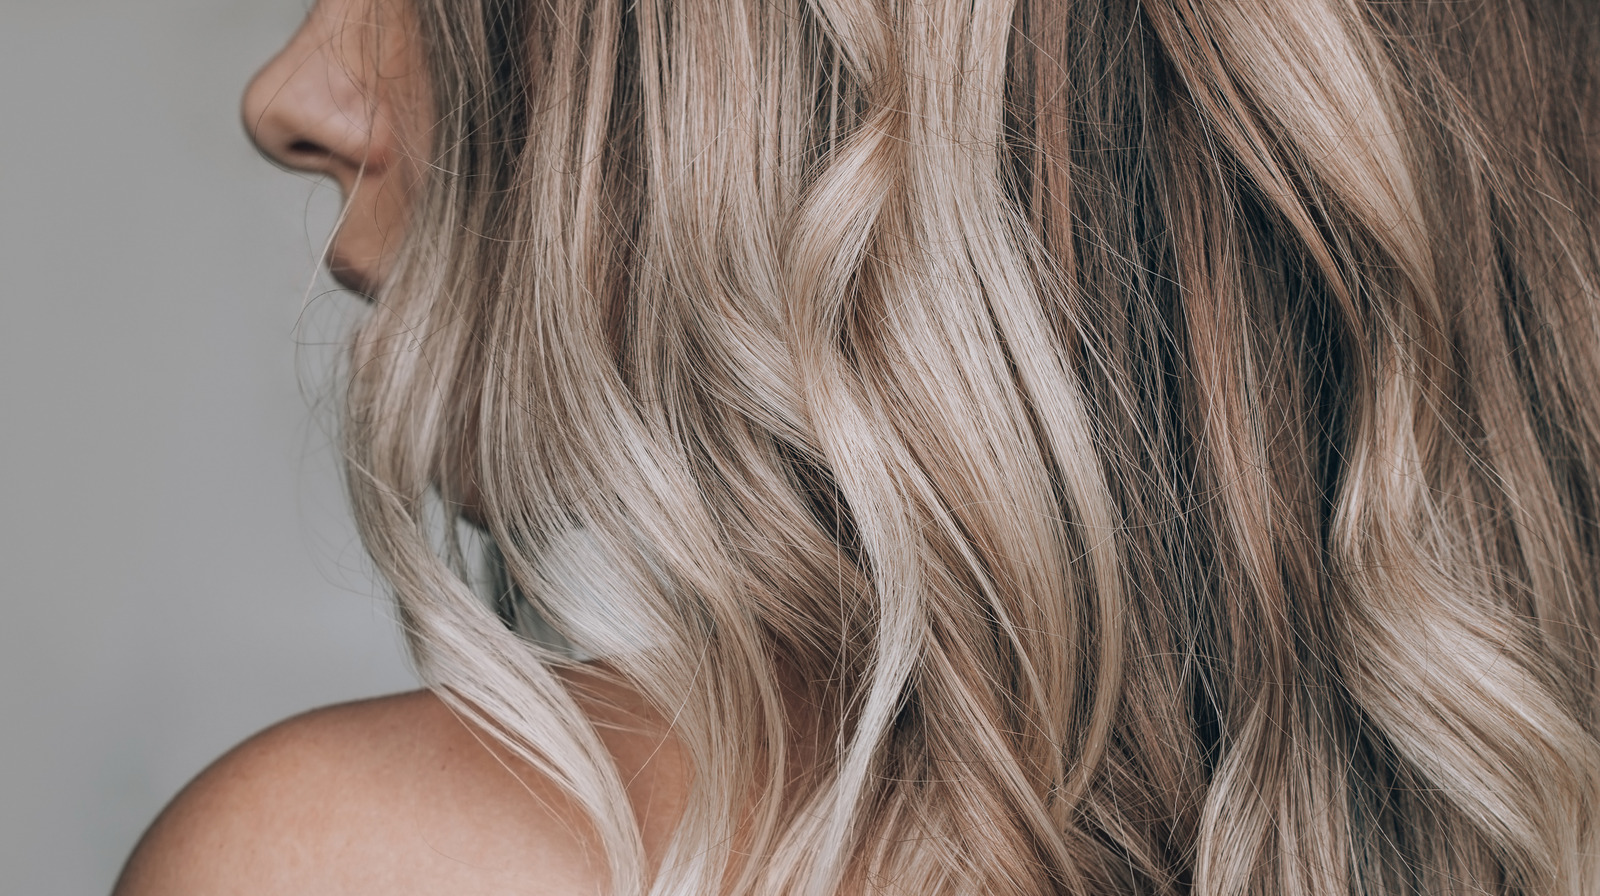 What To Do When Highlights Dry Out Your Hair